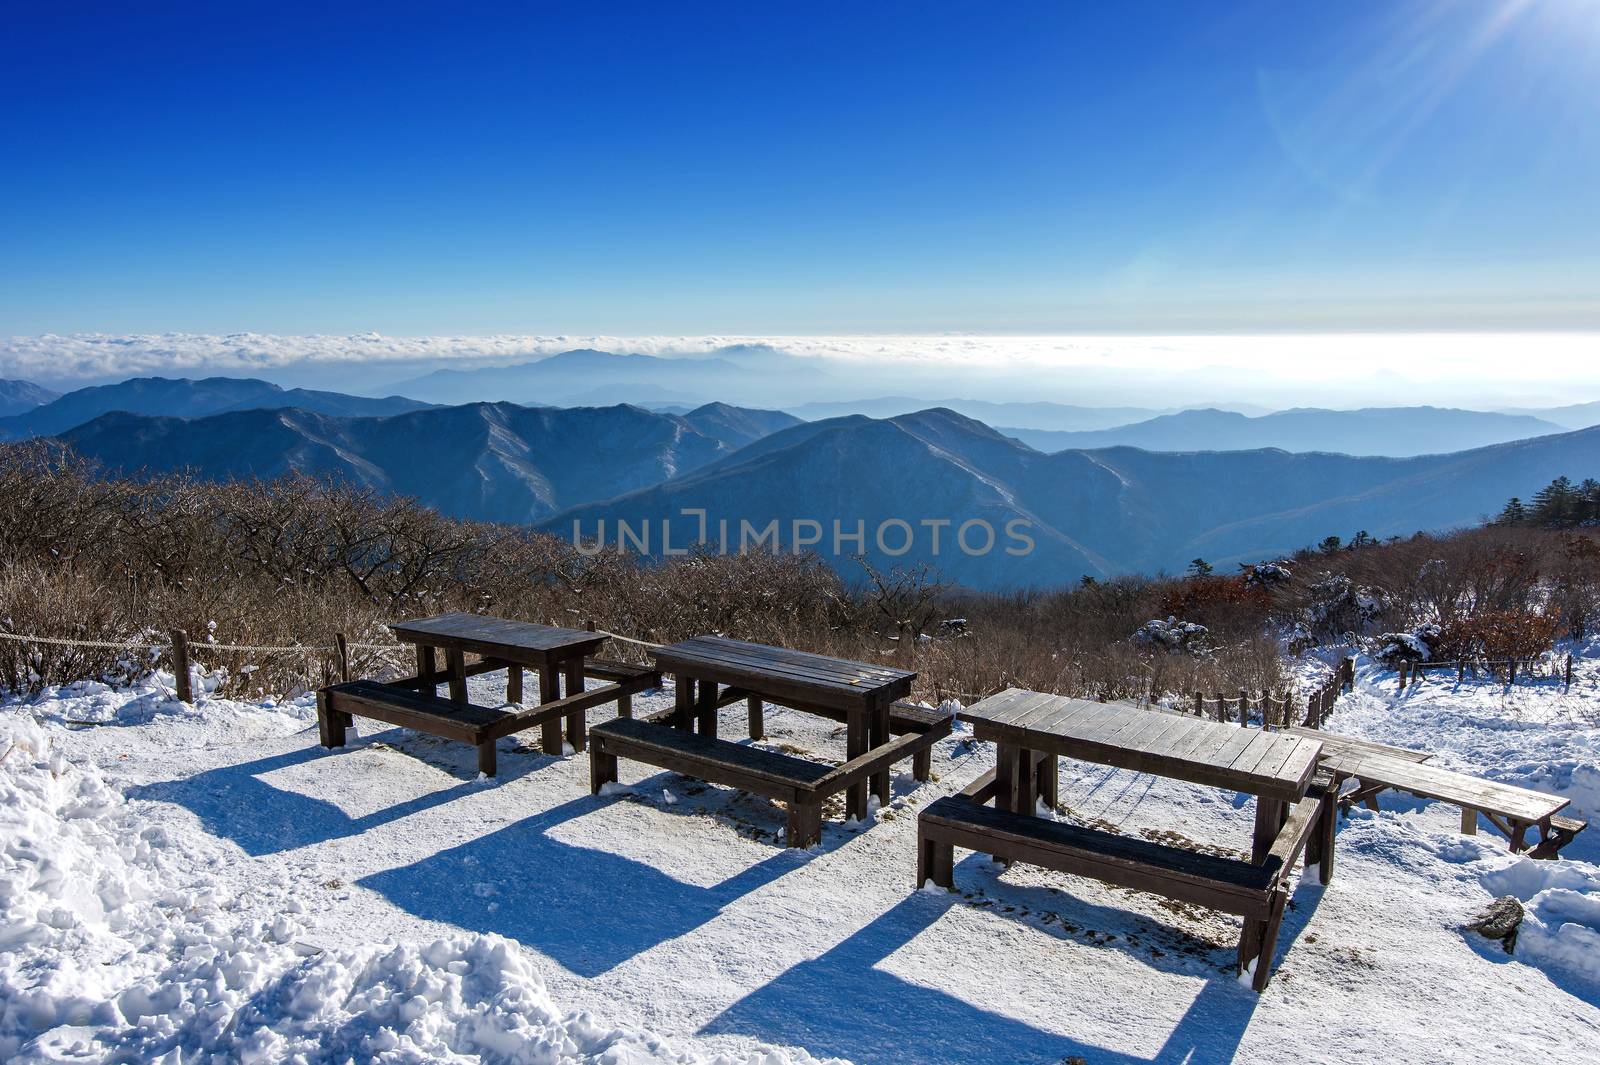 Wooden picnic tables with benches in winter,Deogyusan Mountains, South Korea. by gutarphotoghaphy